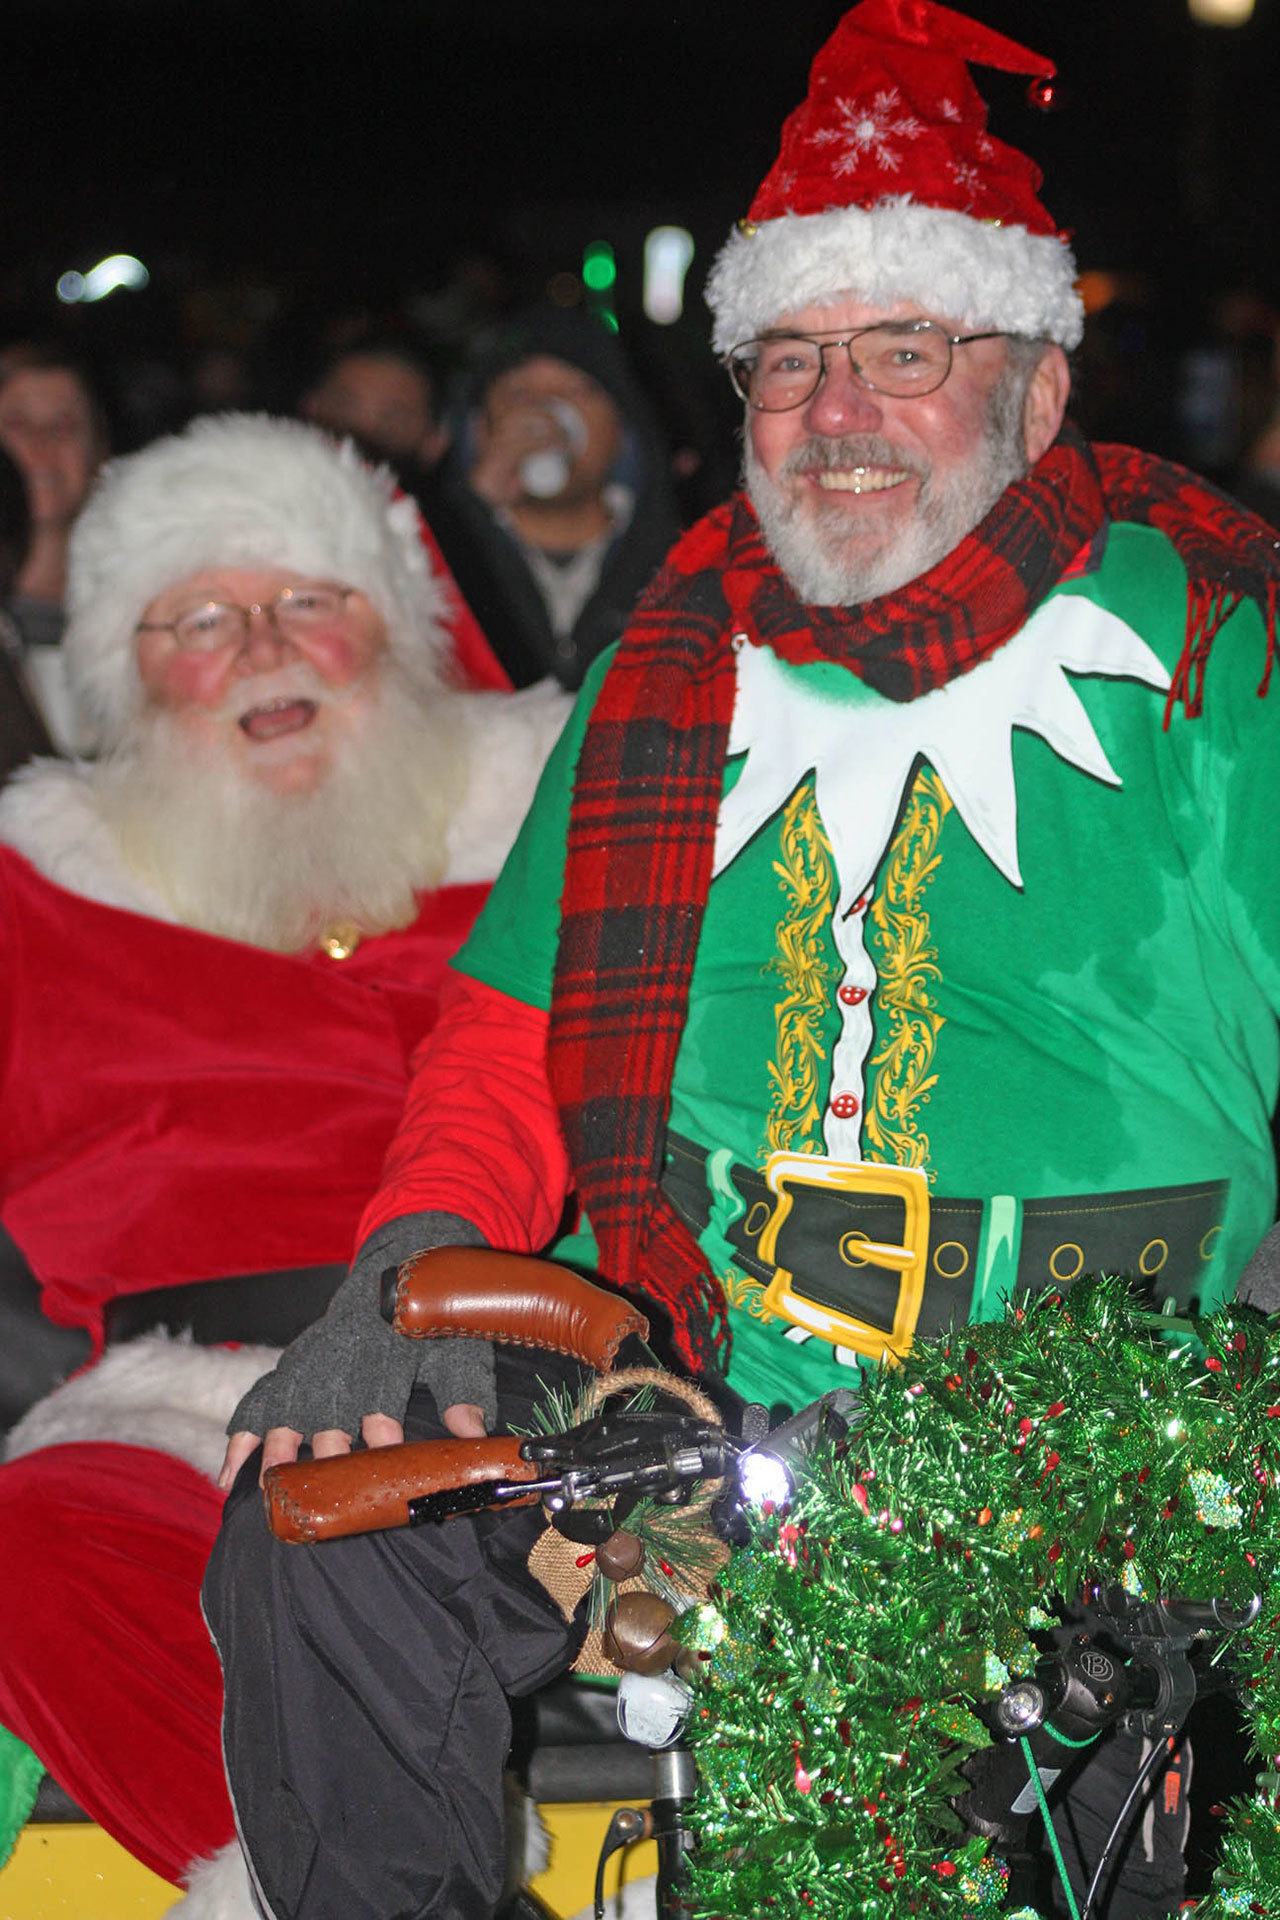 Santa and his helpers are coming to the Kent Winterfest on Saturday, Dec. 3, to greet children and help light the Christmas tree. Winterfest is presented by the Kent Lions. MARK KLAAS, Kent Reporter